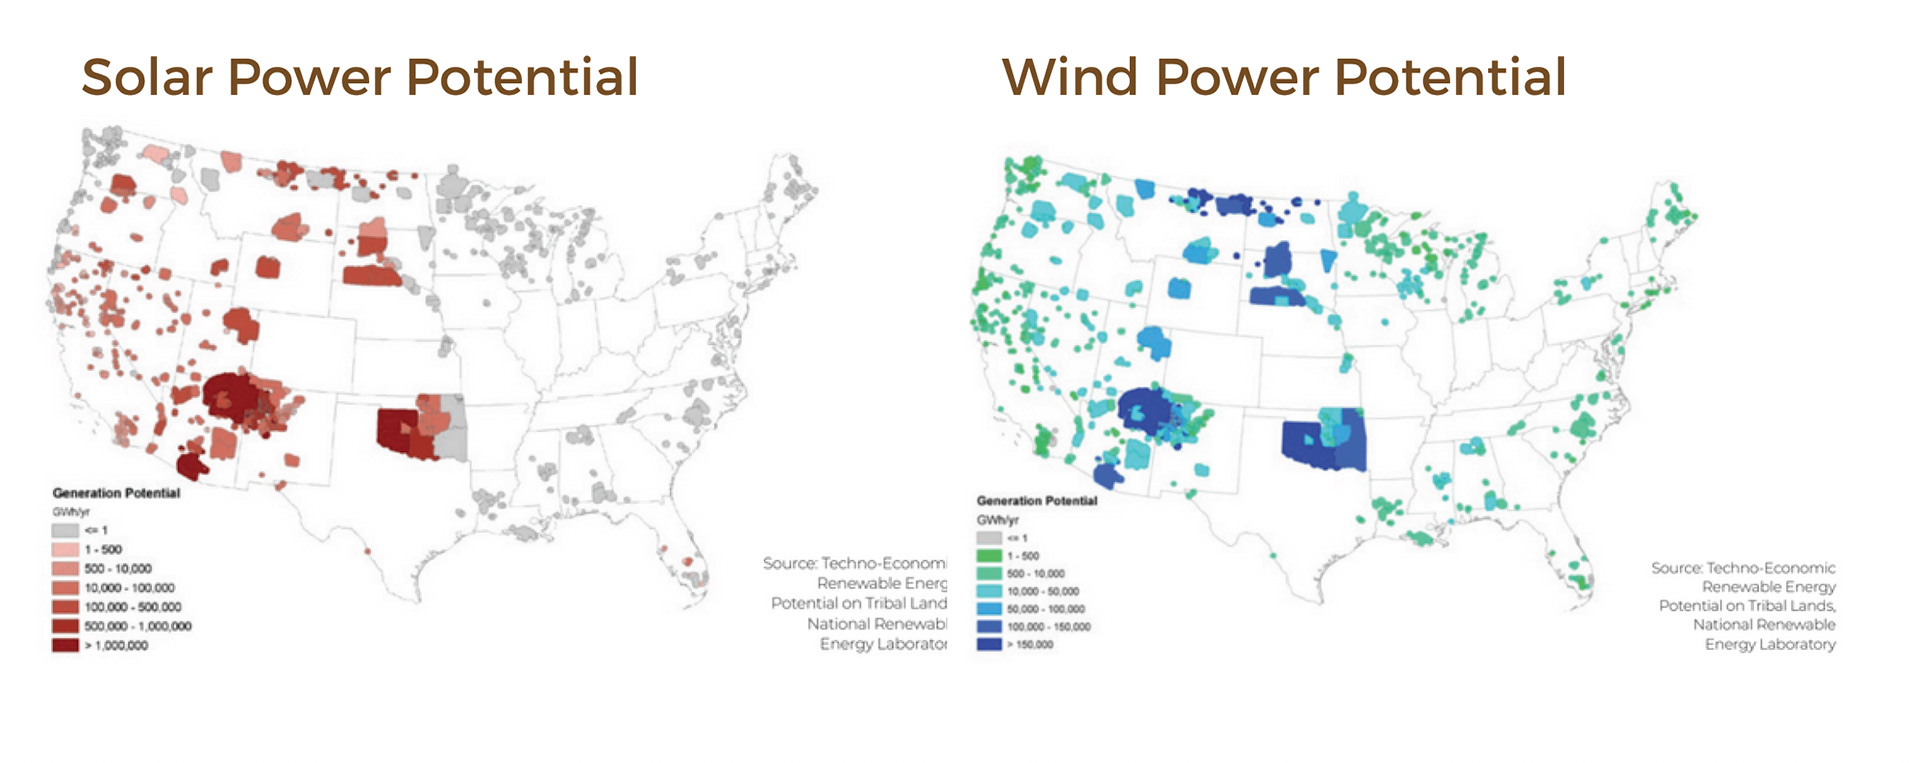 Maps of Solar and Wind Power Potential